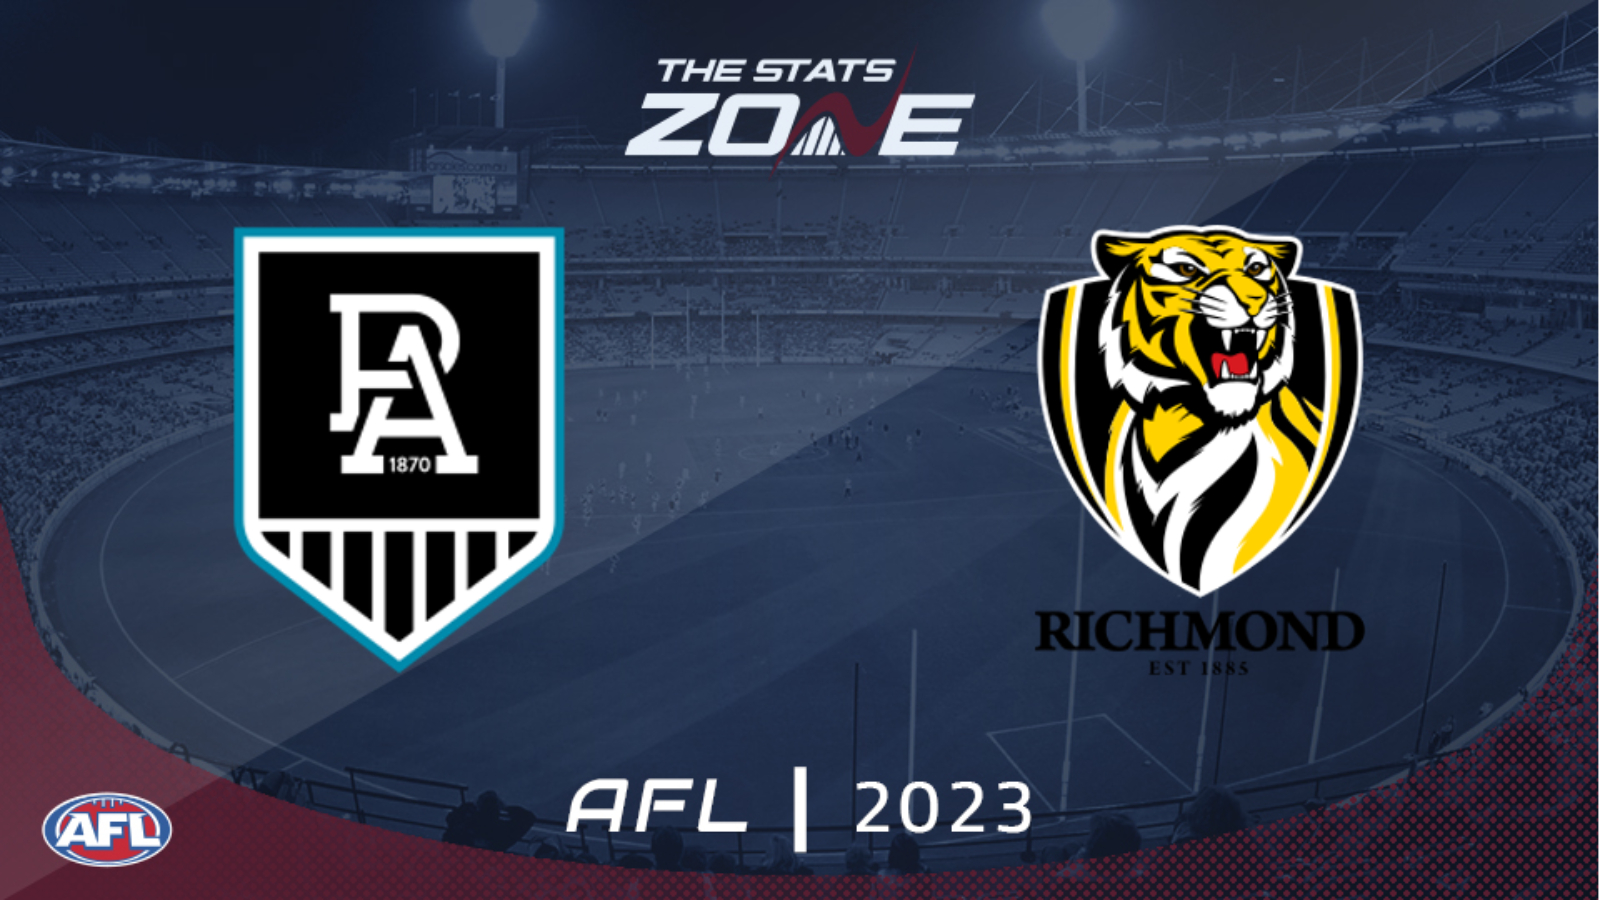 Port Adelaide Vs Richmond Round 24 Preview And Prediction 2023 Afl The Stats Zone